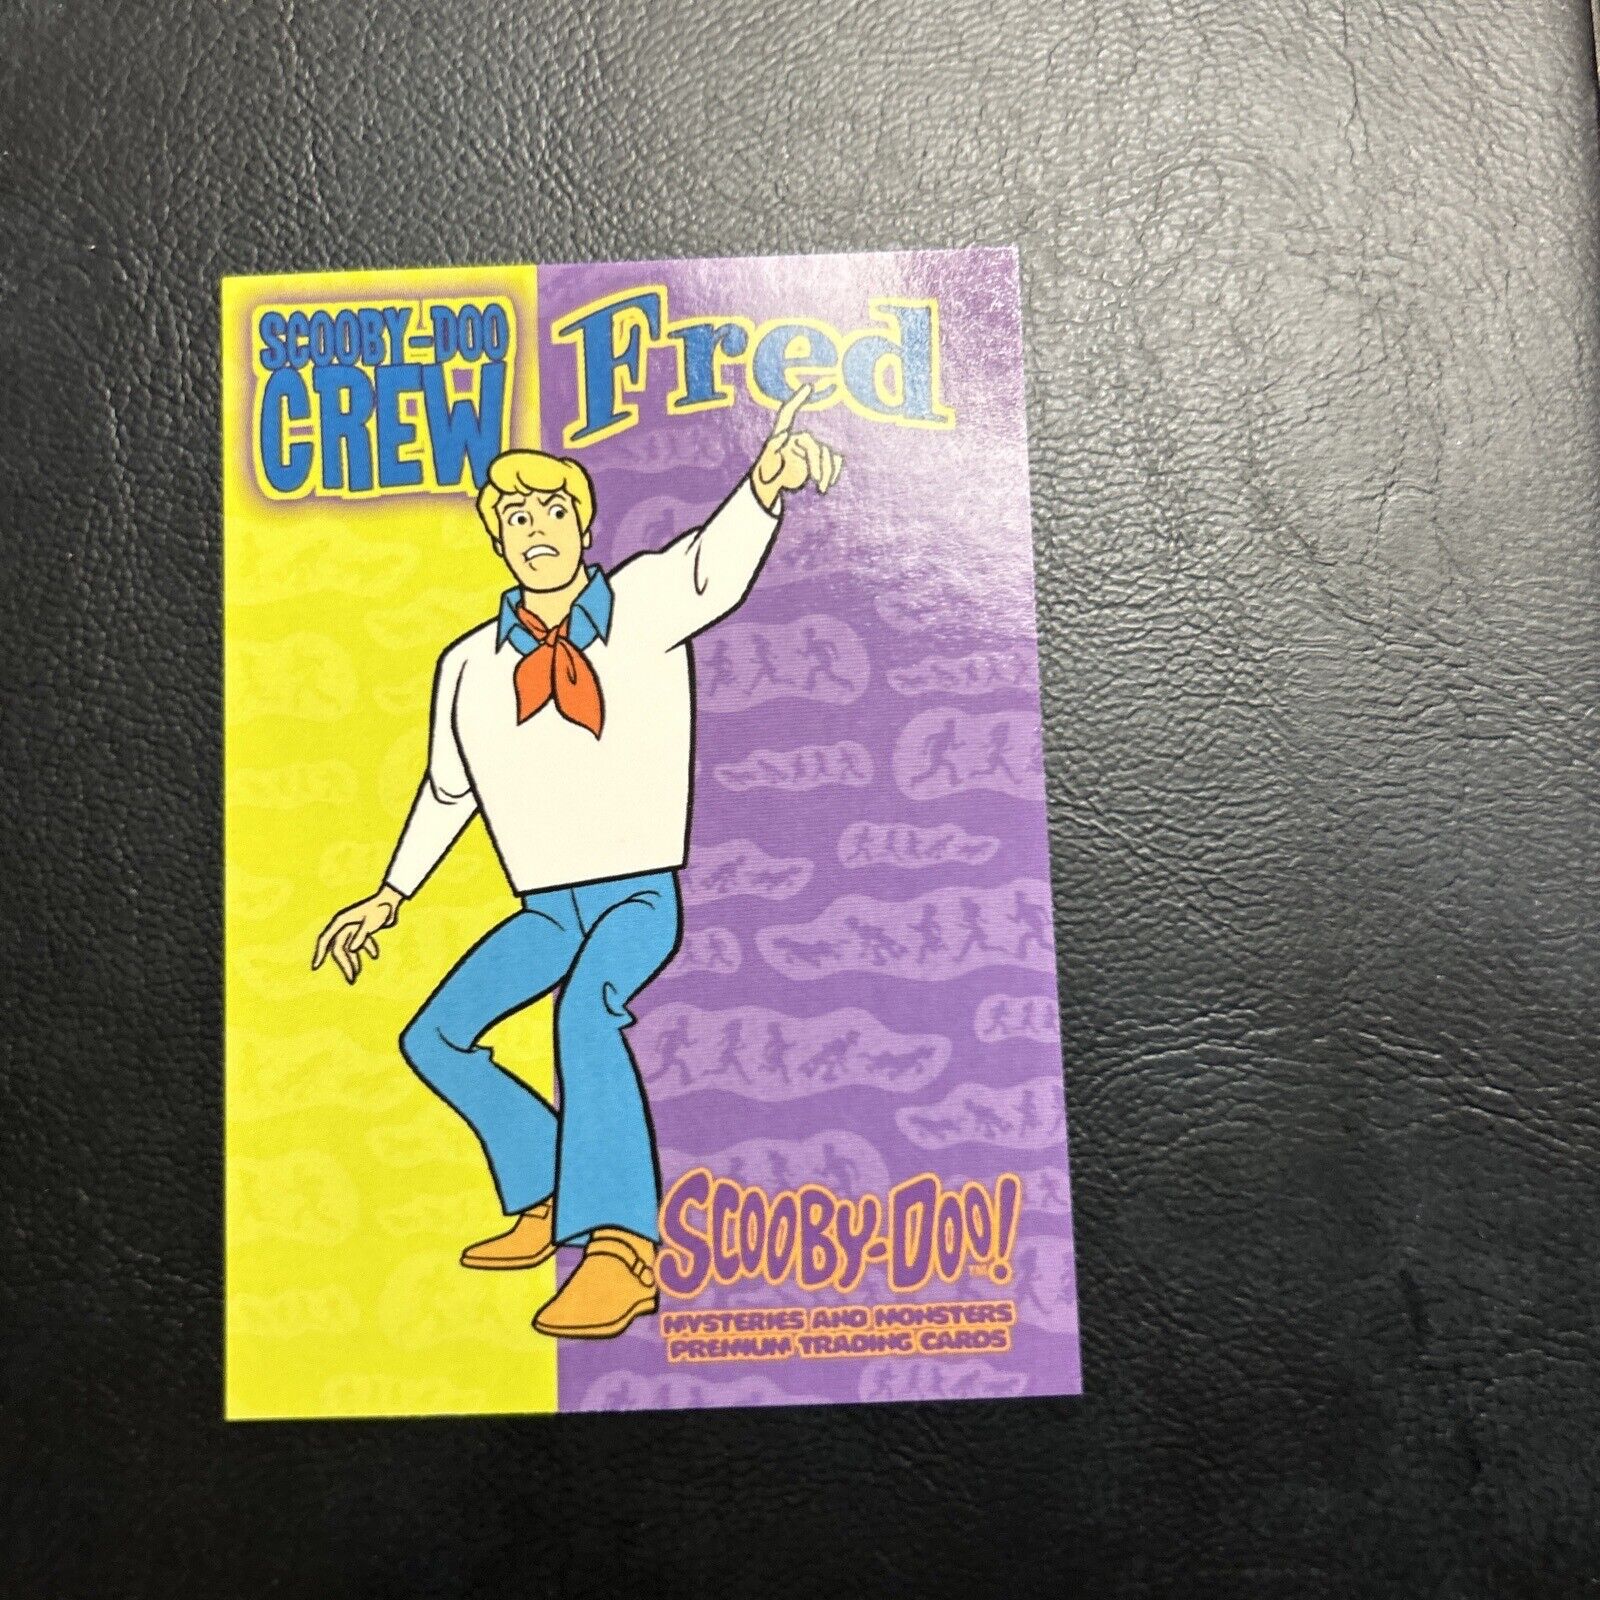 Jb14 Scooby Doo Mysteries And Monsters 2003 Inkworks #4 Fred. Crew